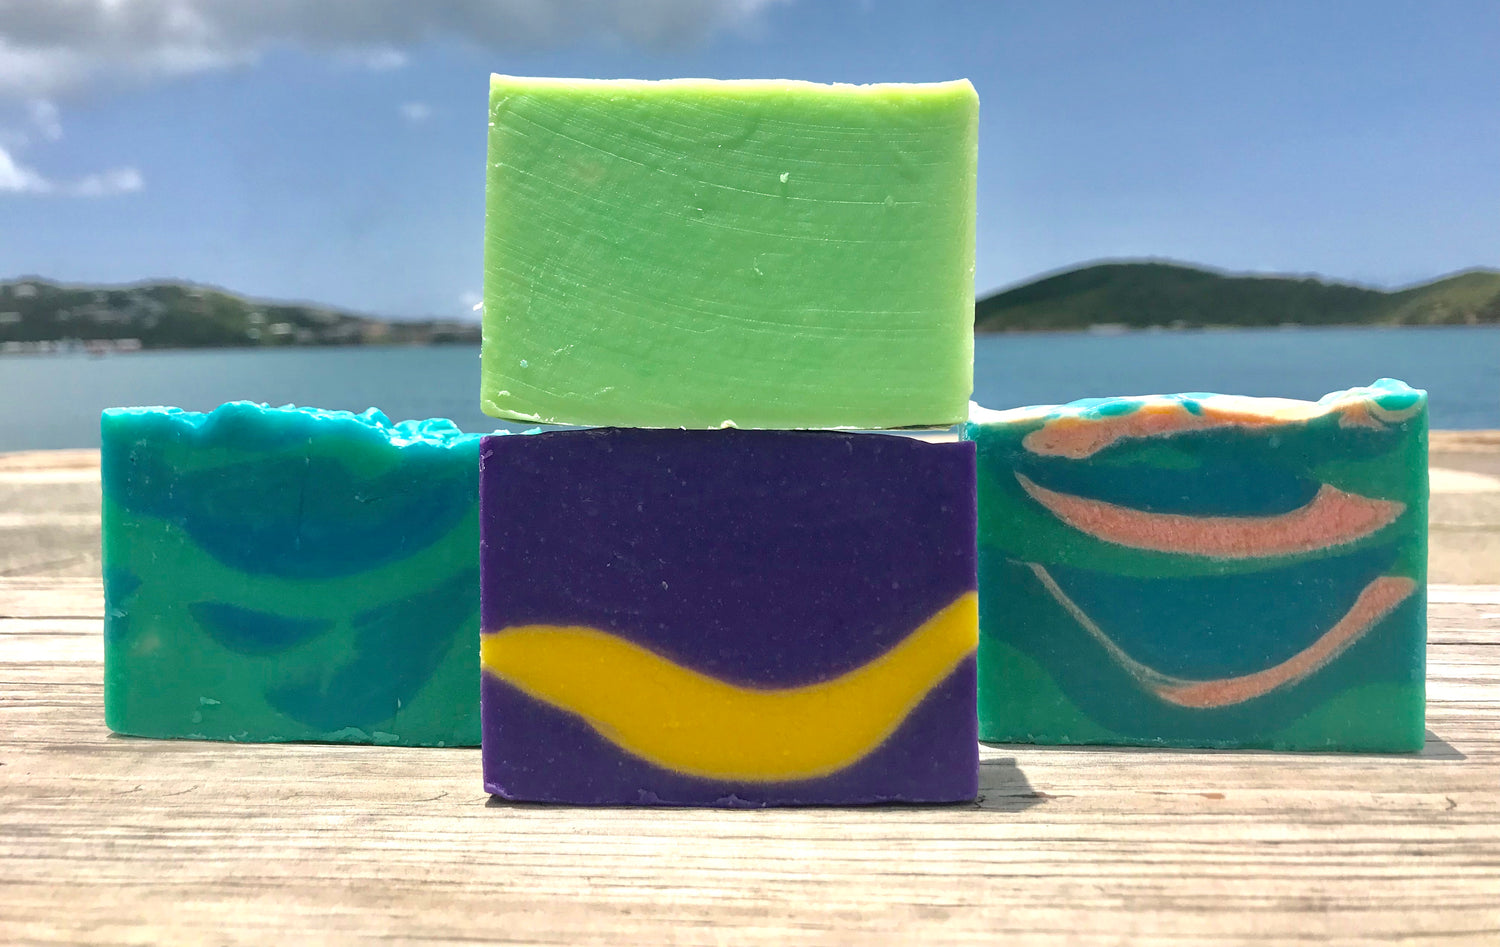 ocean themed or colorful handmade soaps by JDNatlady's Creations on light wooden surface with water and islands in background 